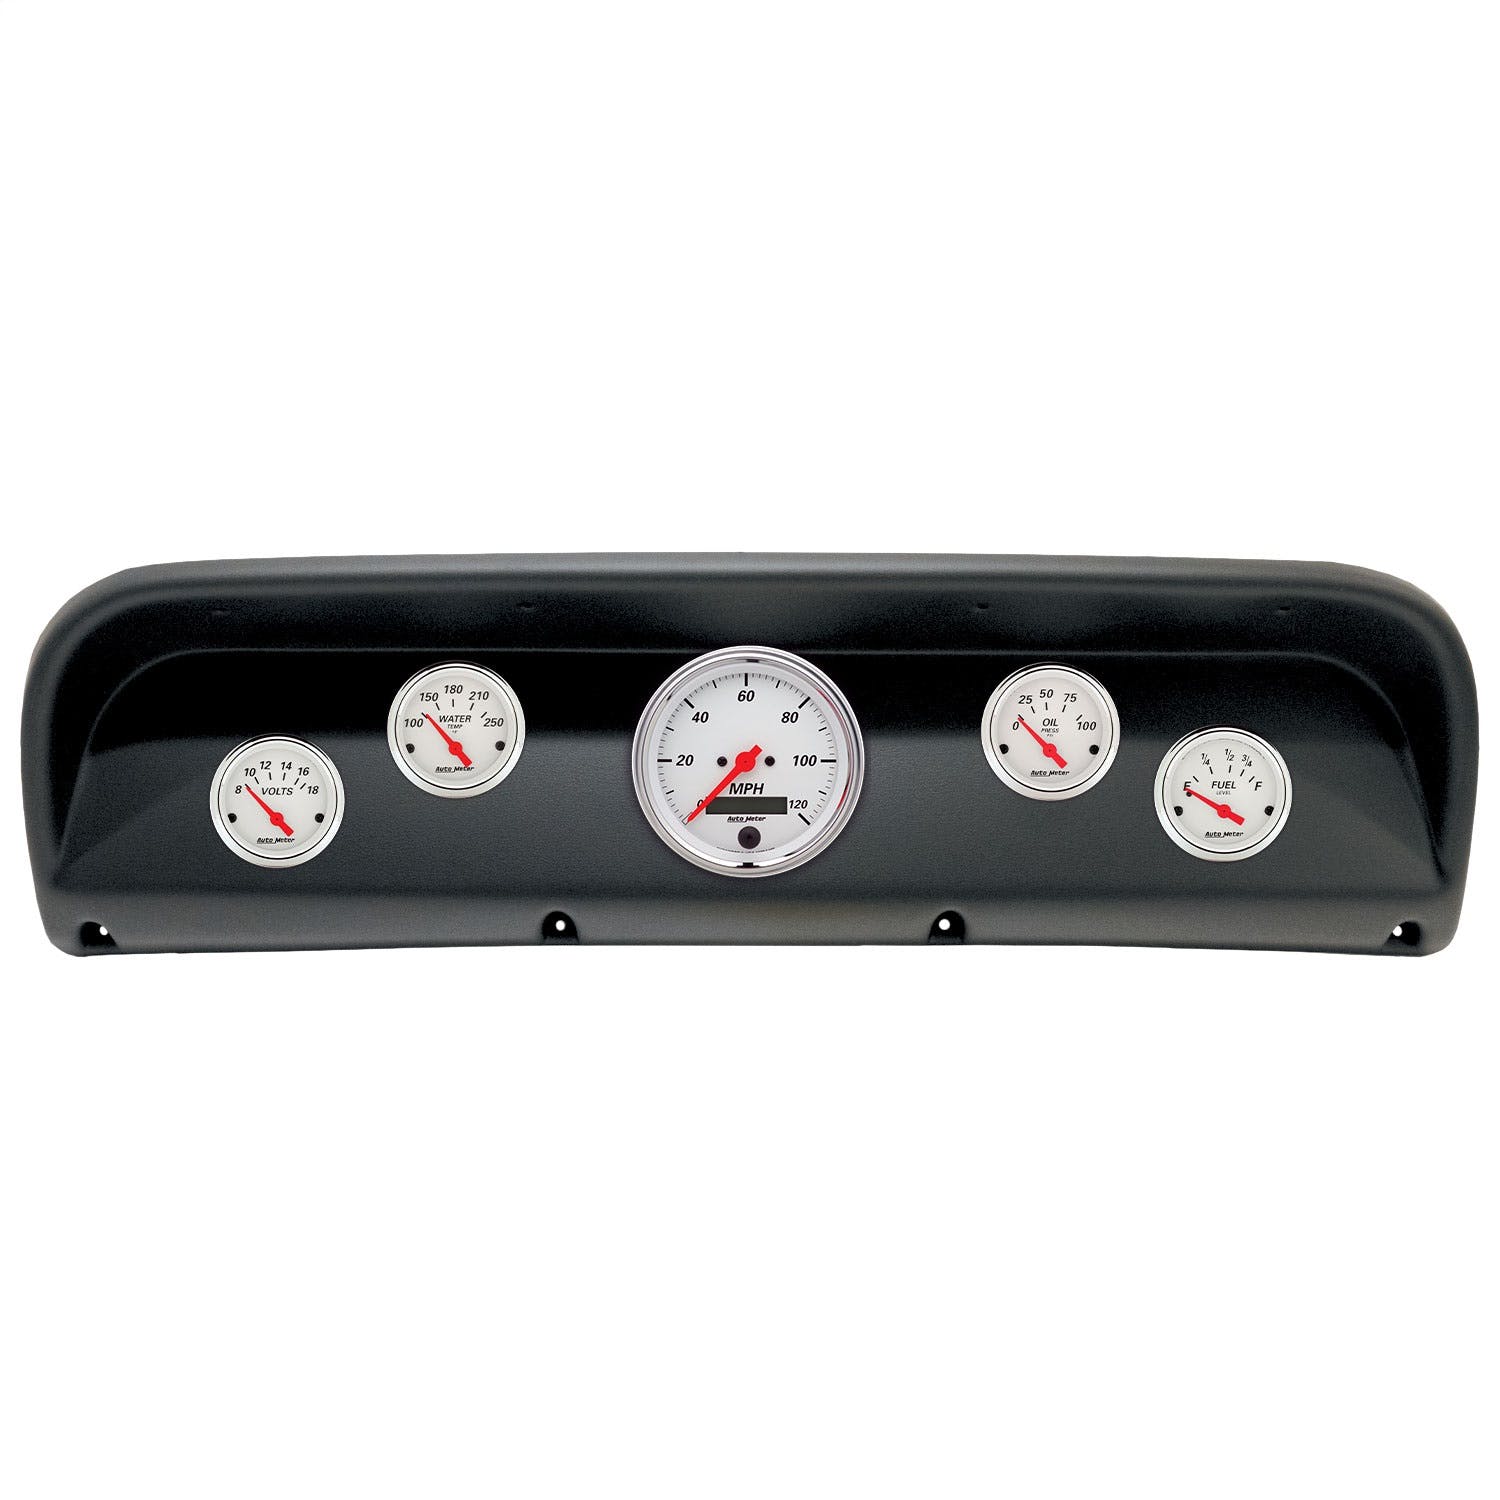 AutoMeter Products 2900-03 5 Gauge Direct-Fit Dash Kit, Ford Truck 67-72, Arctic White